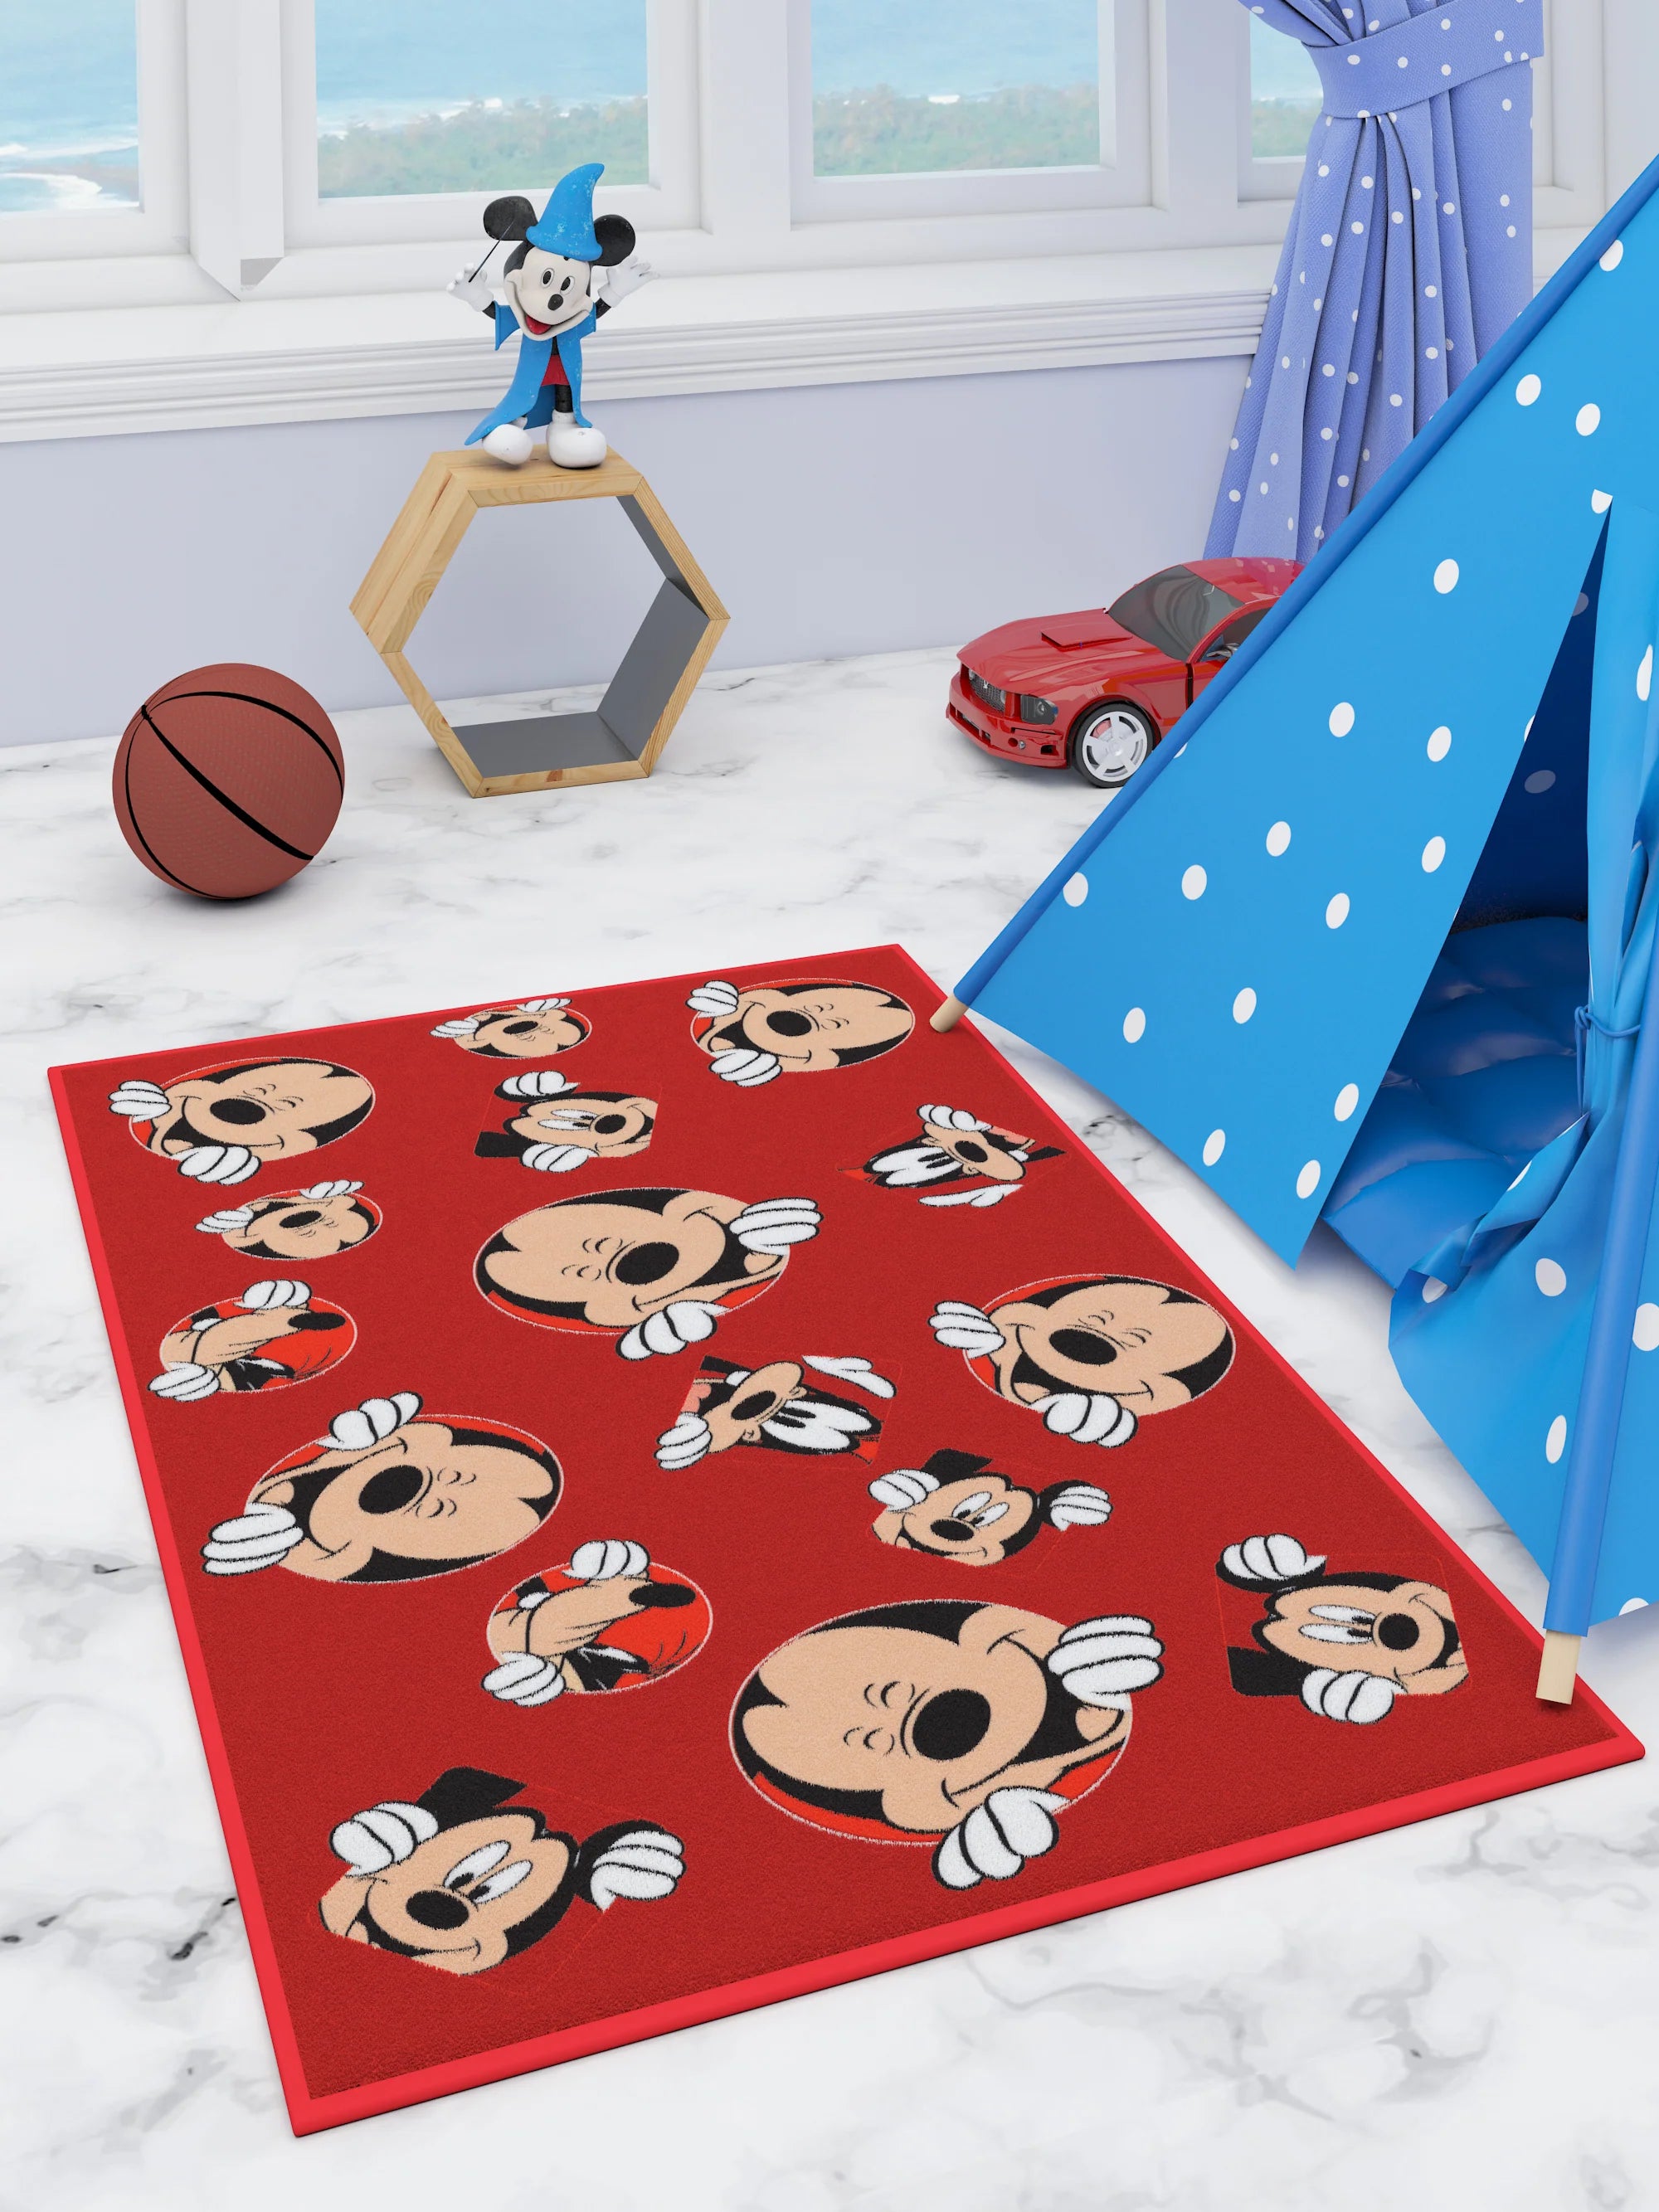 Step into the Magical World with Disney's Mickey Mouse Kids Red Carpet